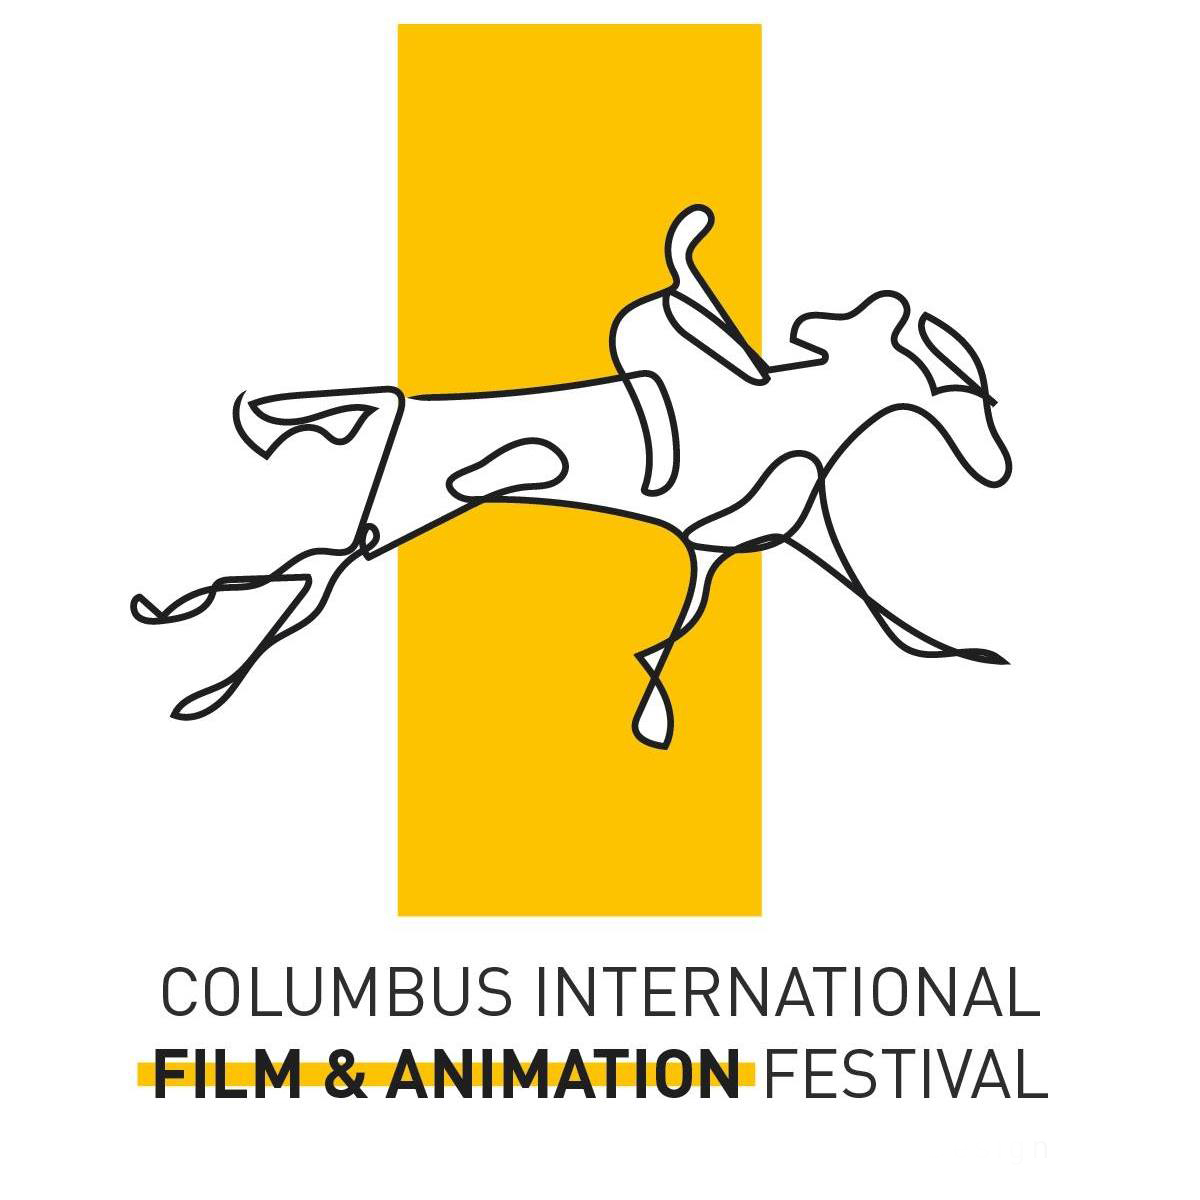 Welcome to the 70th Columbus International Film and Animation Festival